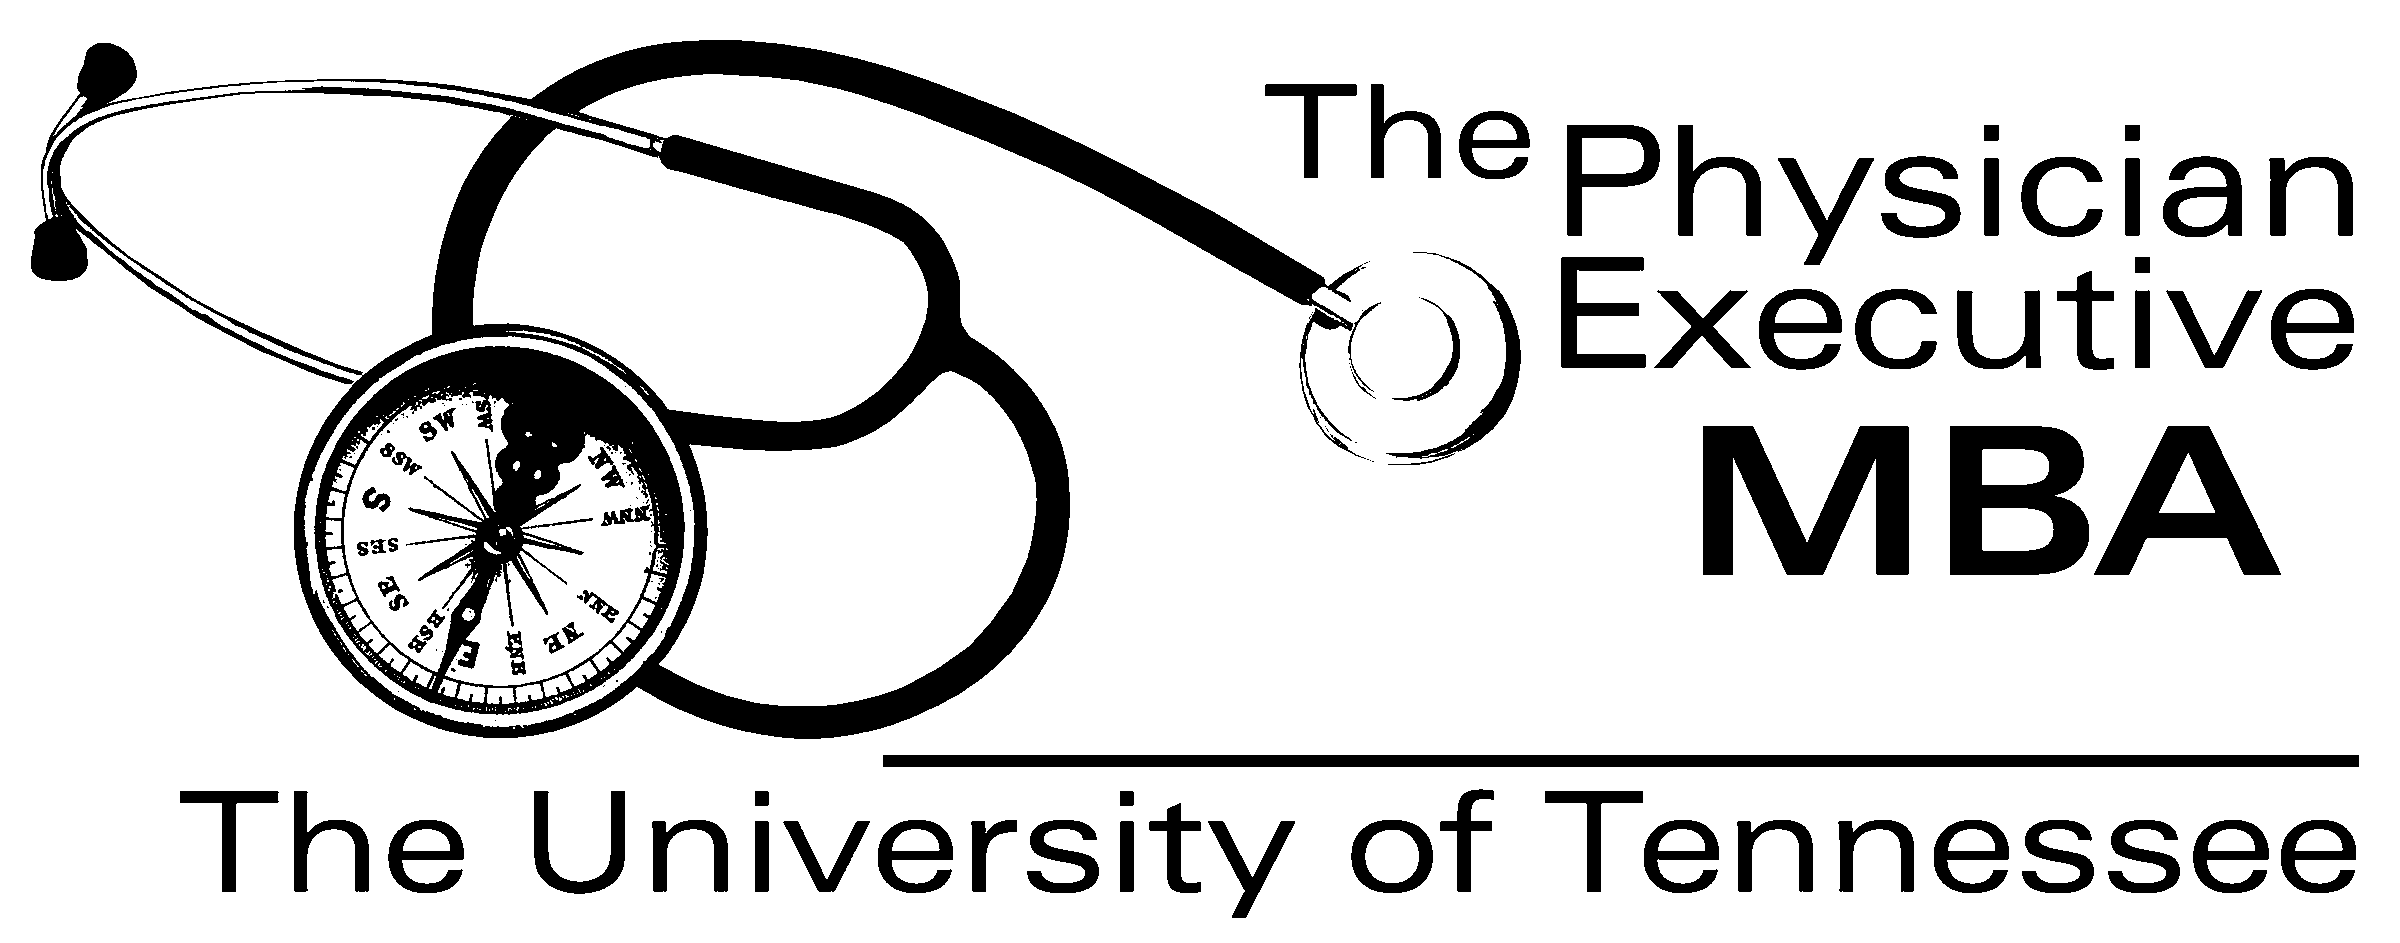  THE PHYSICAL EXECUTIVE MBA THE UNIVERSITY OF TENNESSEE